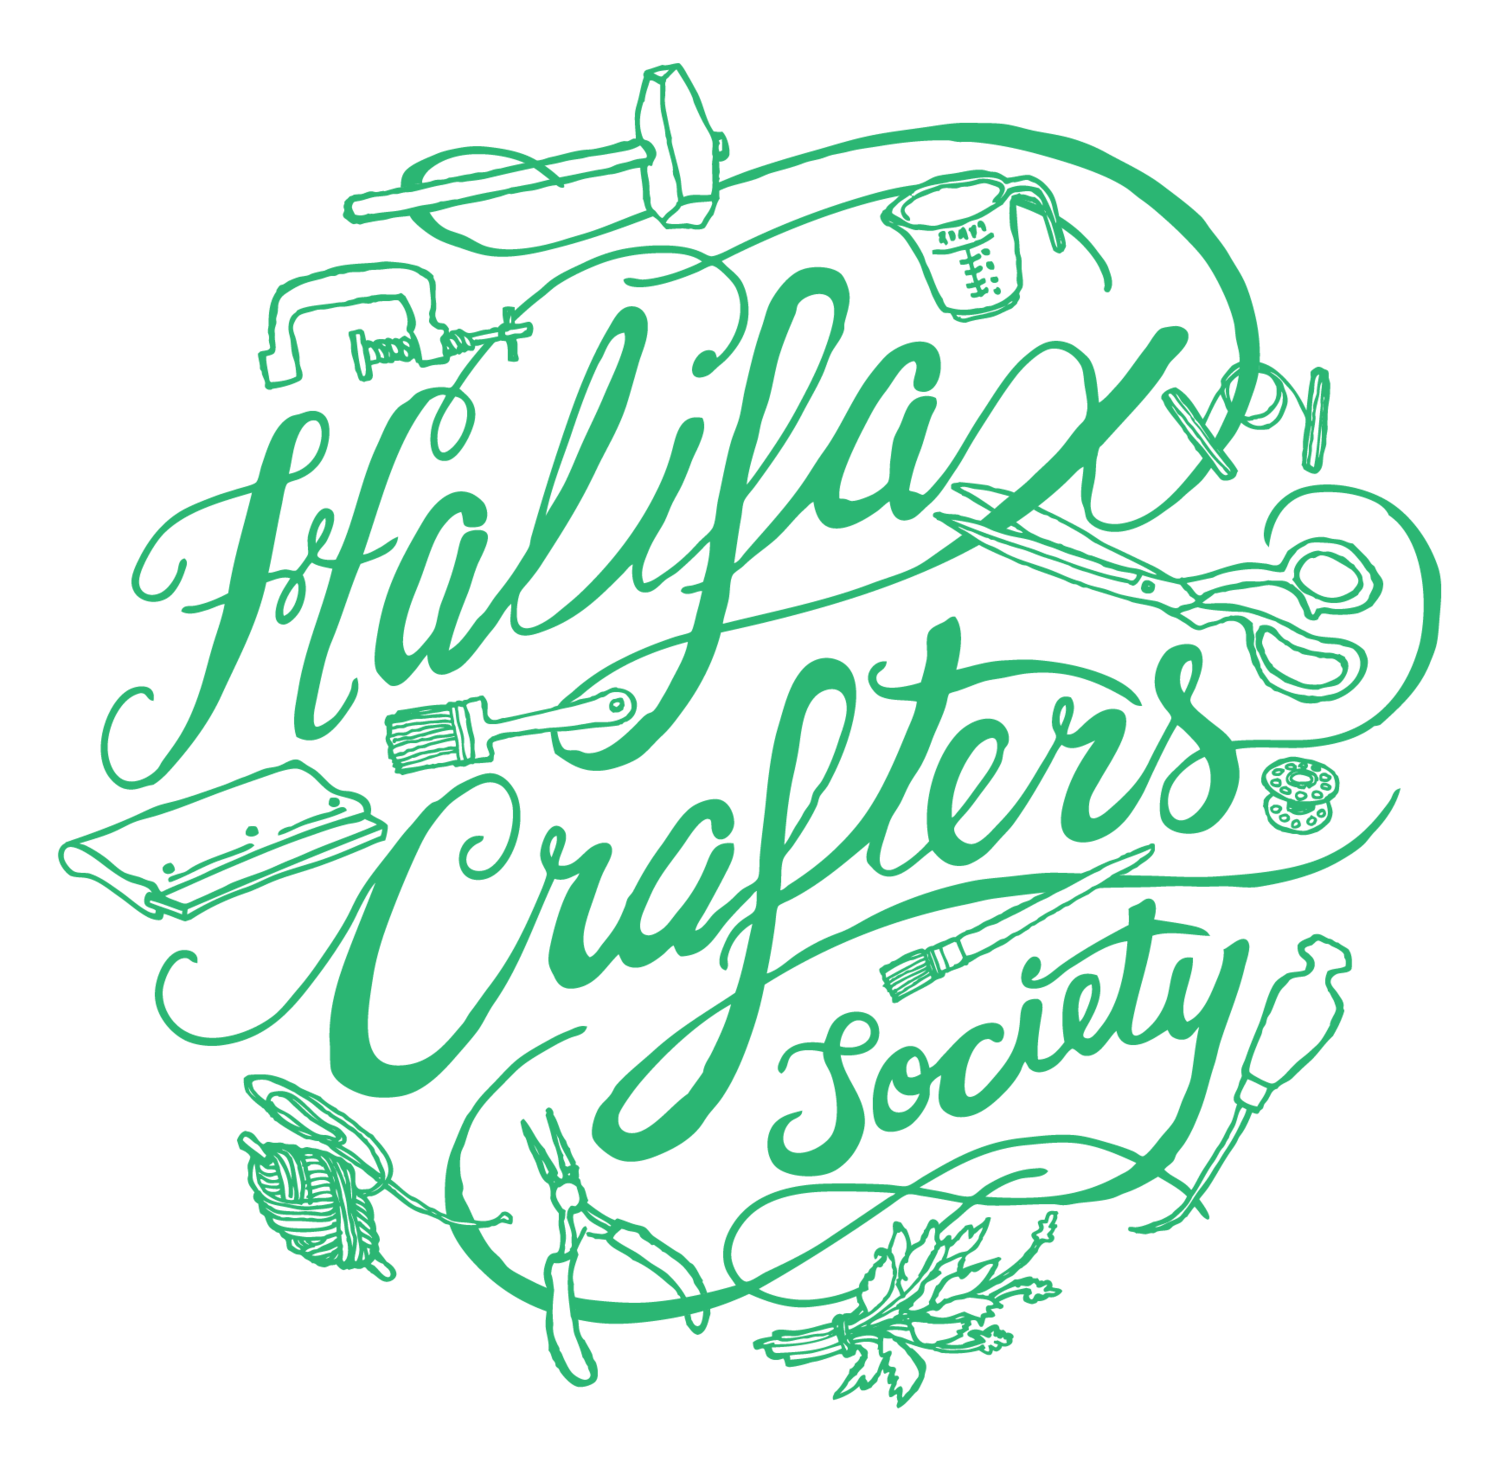 Halifax Crafters Society